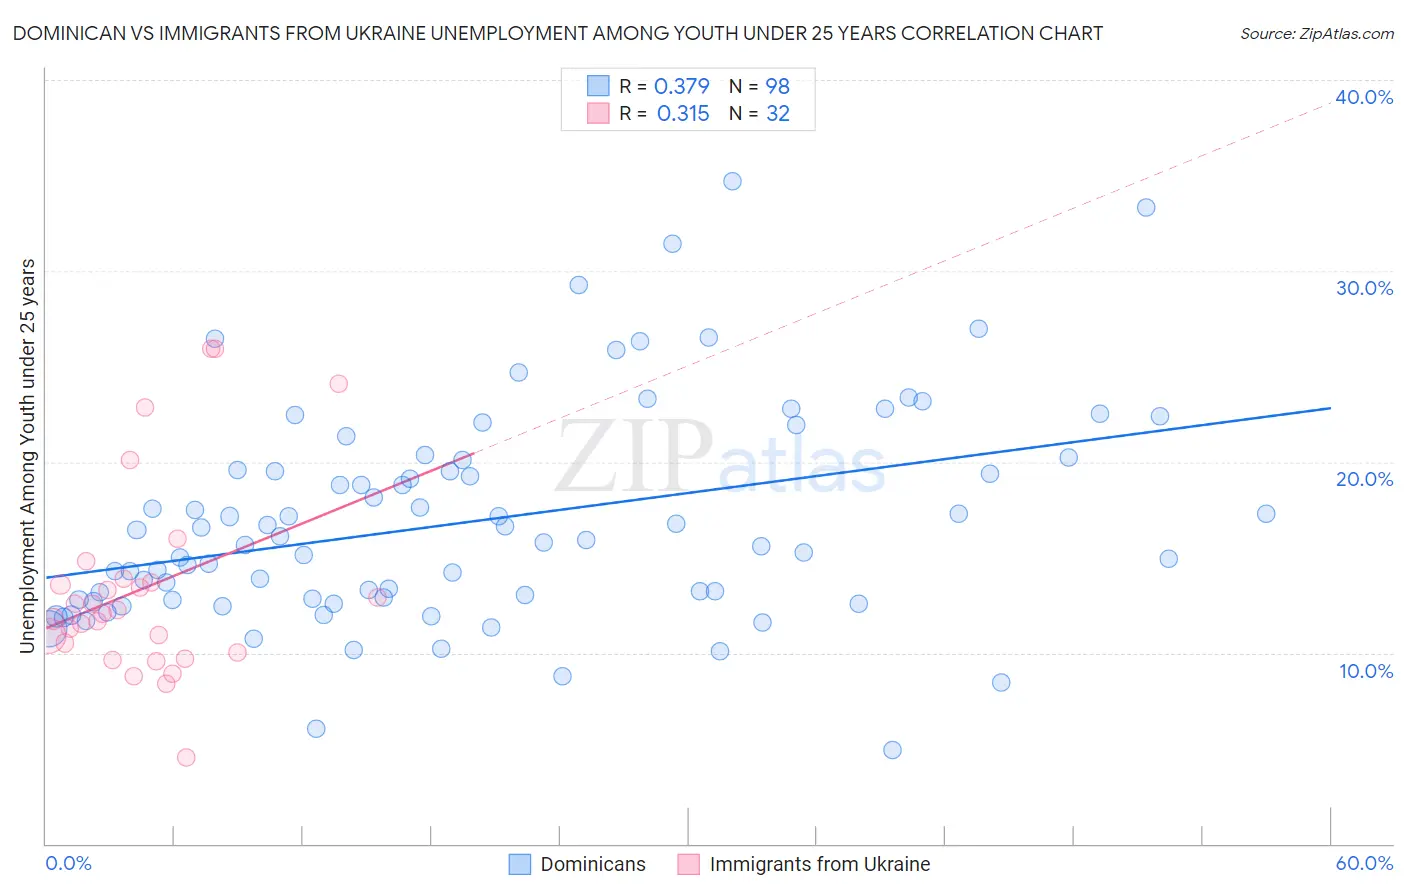 Dominican vs Immigrants from Ukraine Unemployment Among Youth under 25 years